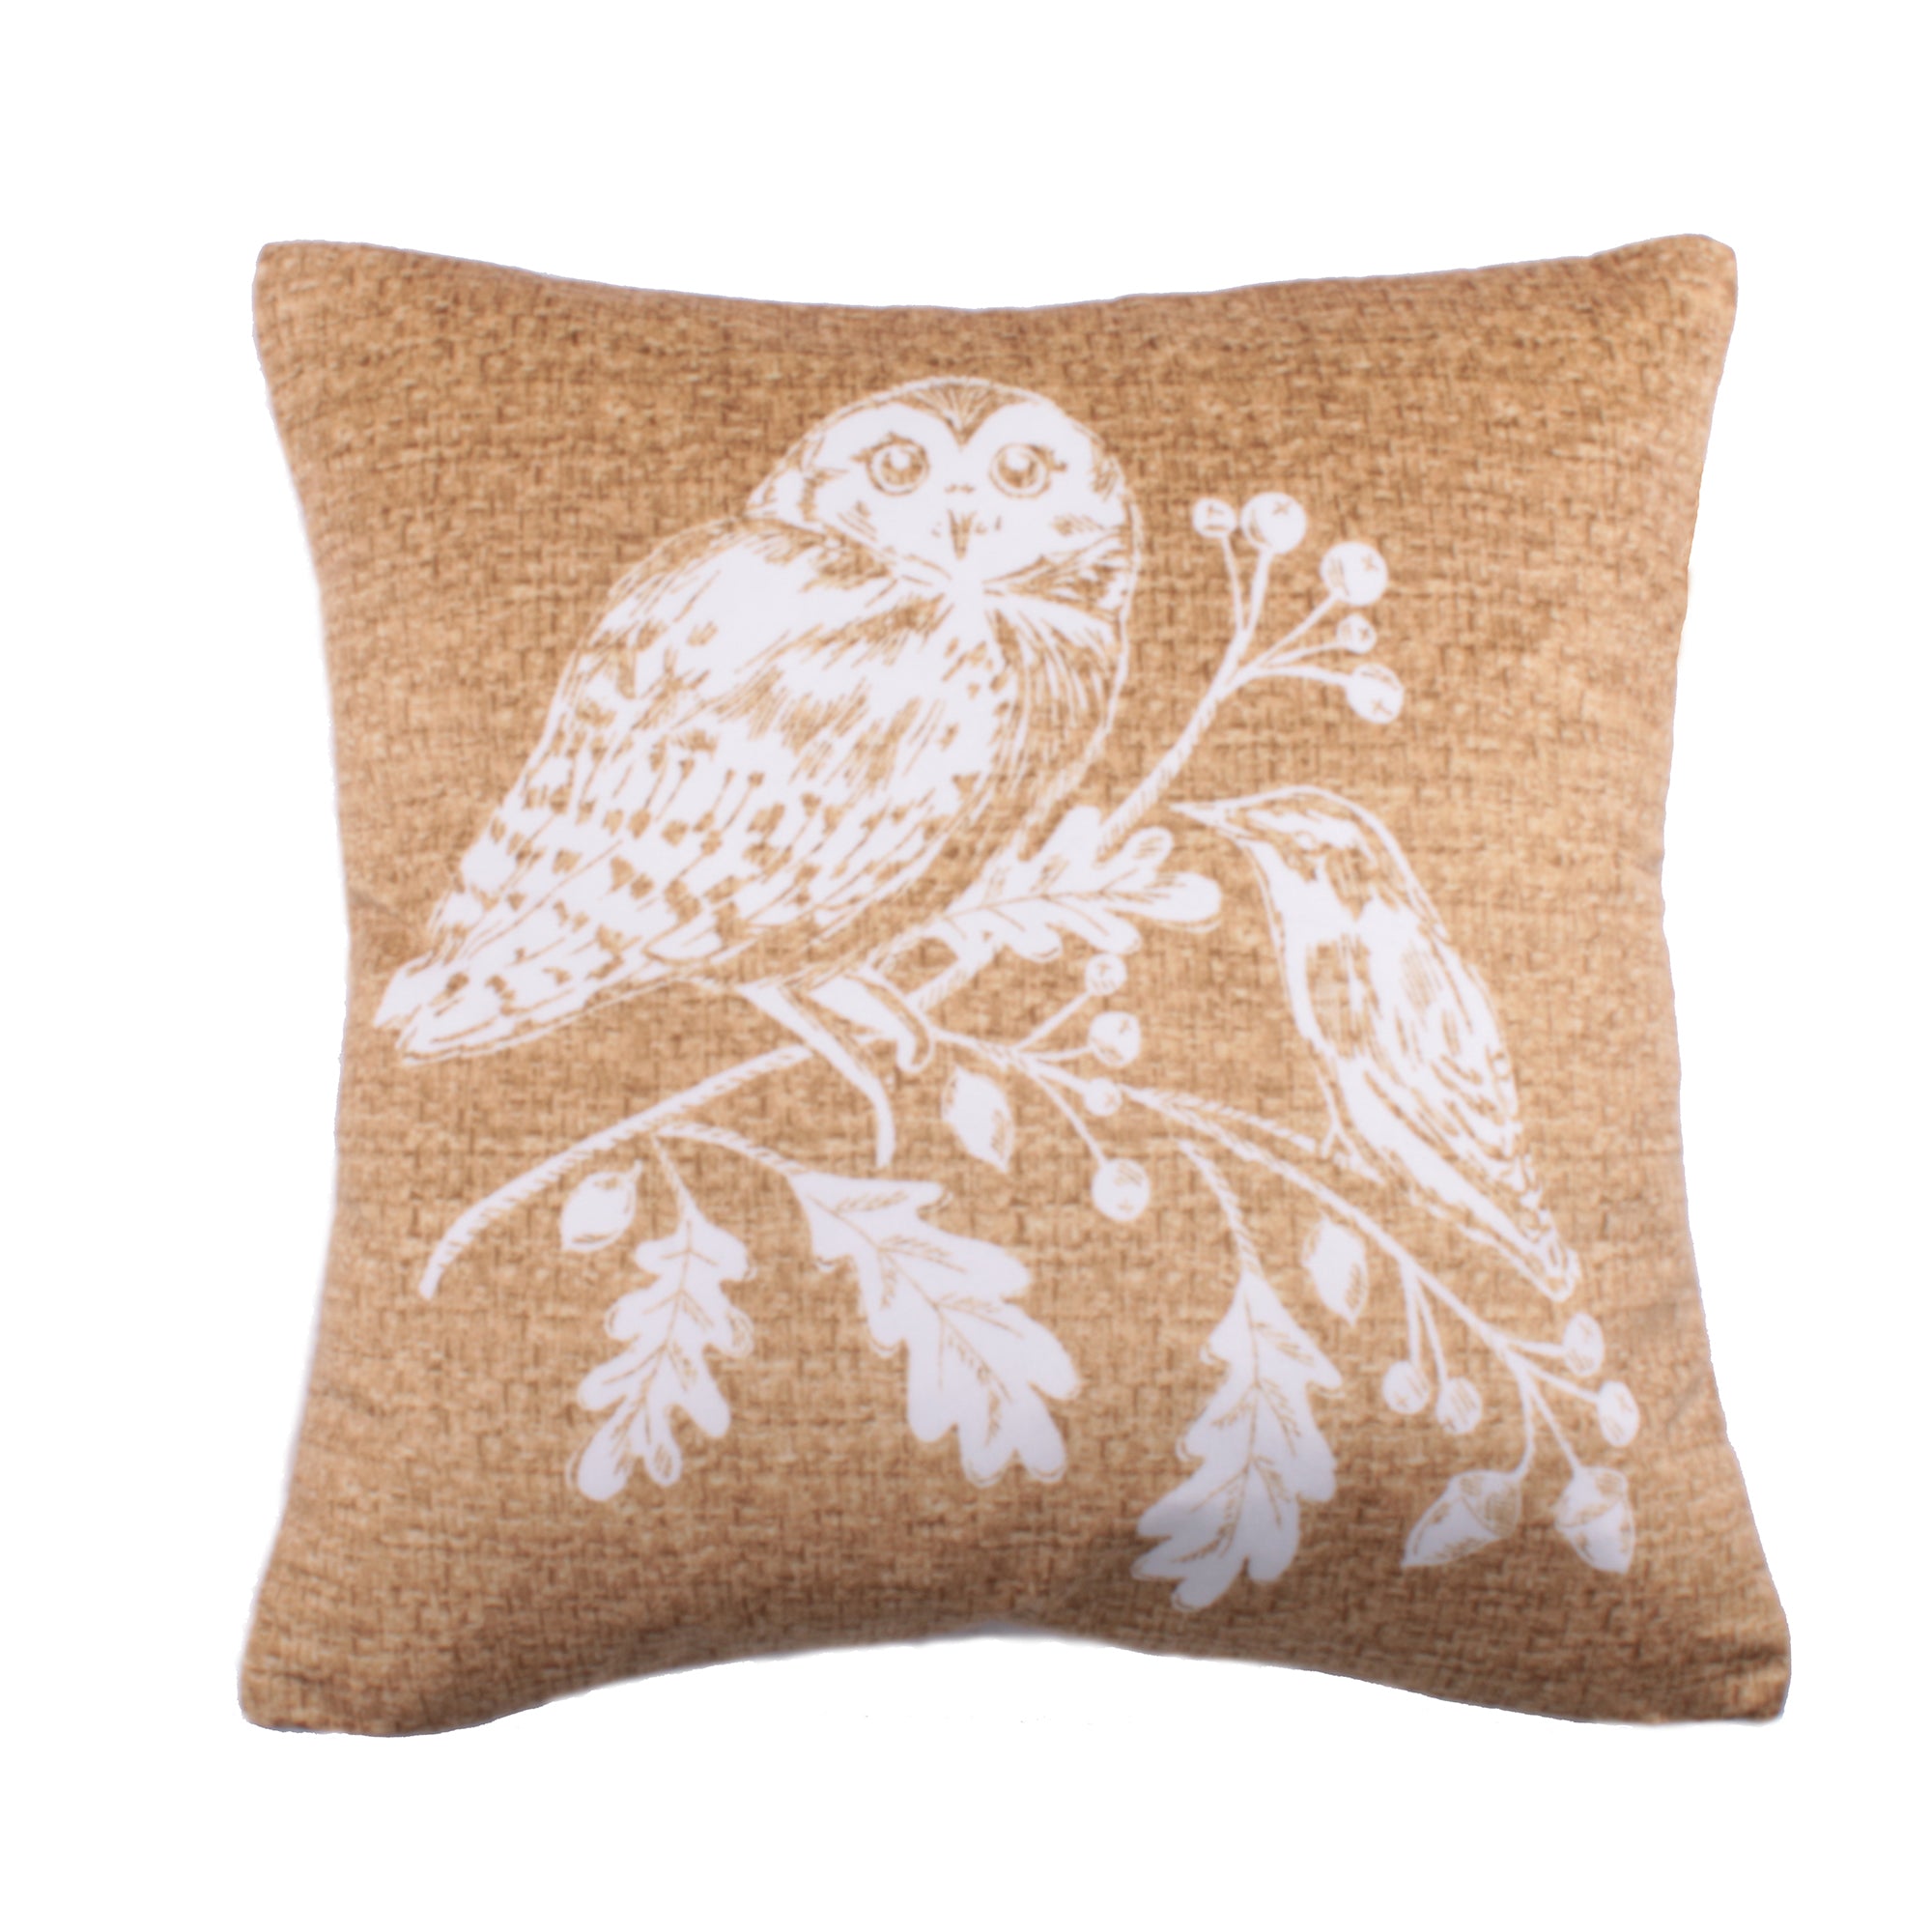 Filled Cushion Woodland Owls by D&D Lodge in Ochre